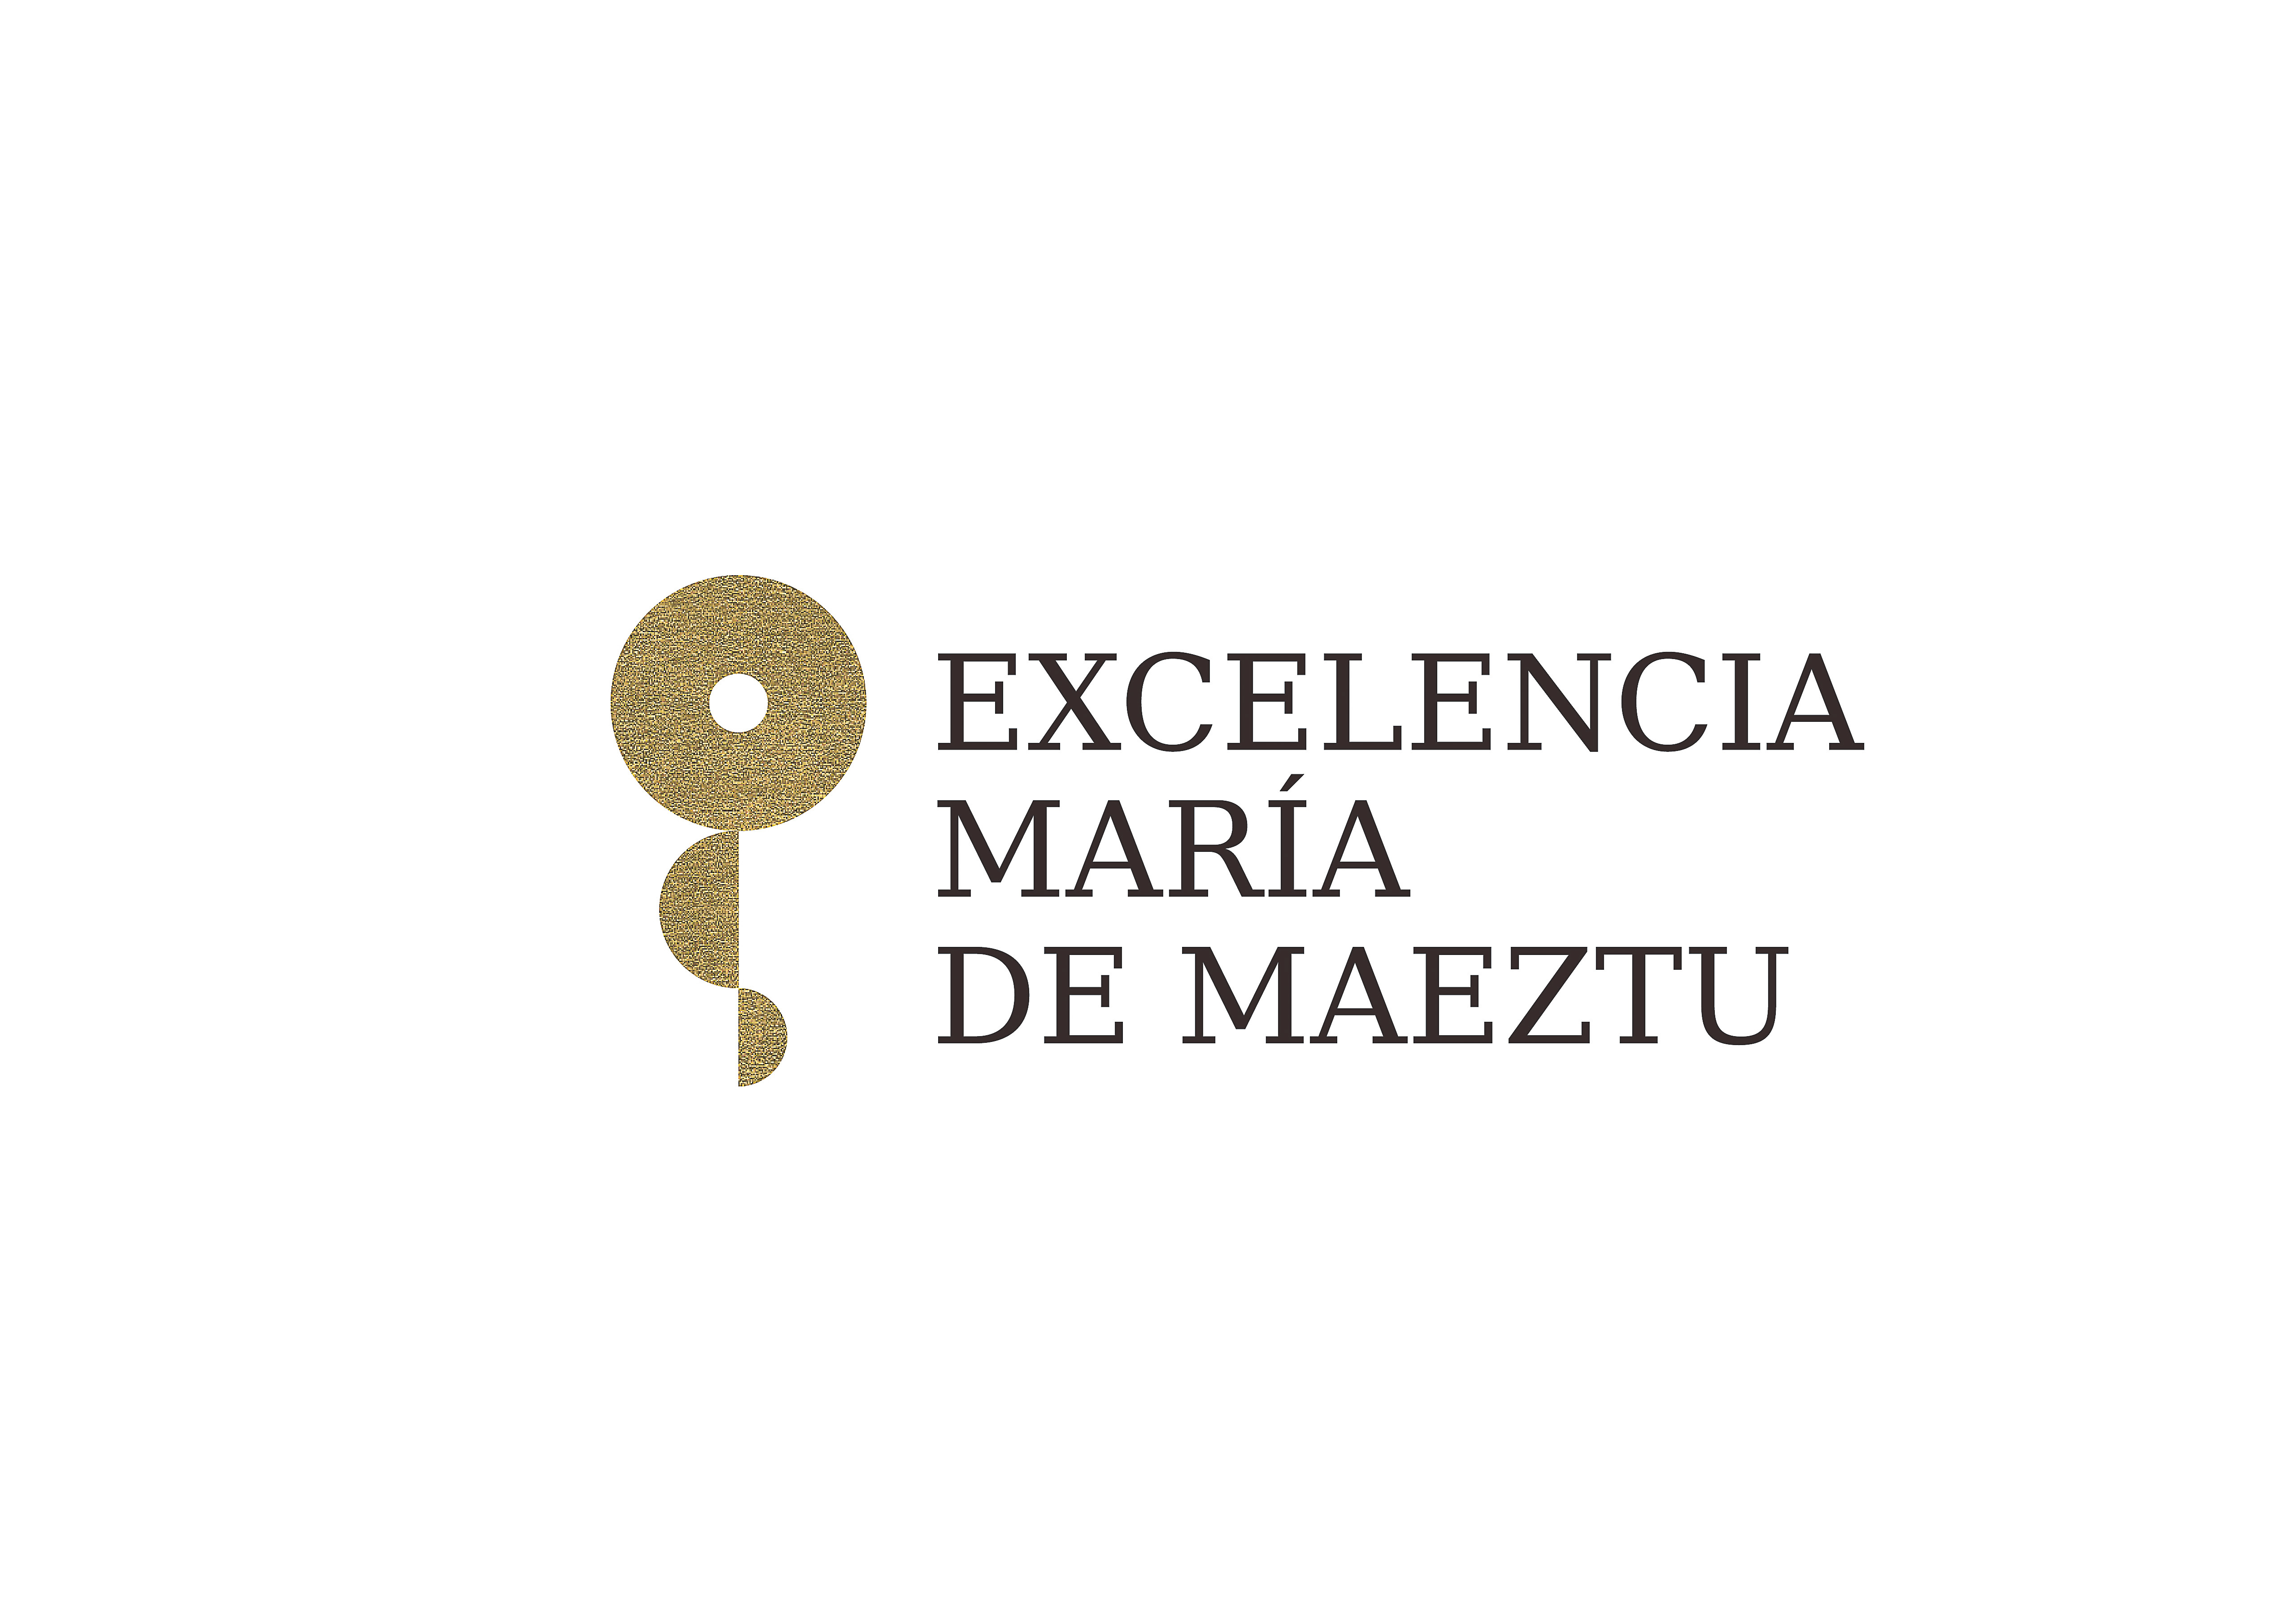 The Department of Information and Communication Technologies, recognized as a María de Maeztu unit of excellence for the second time